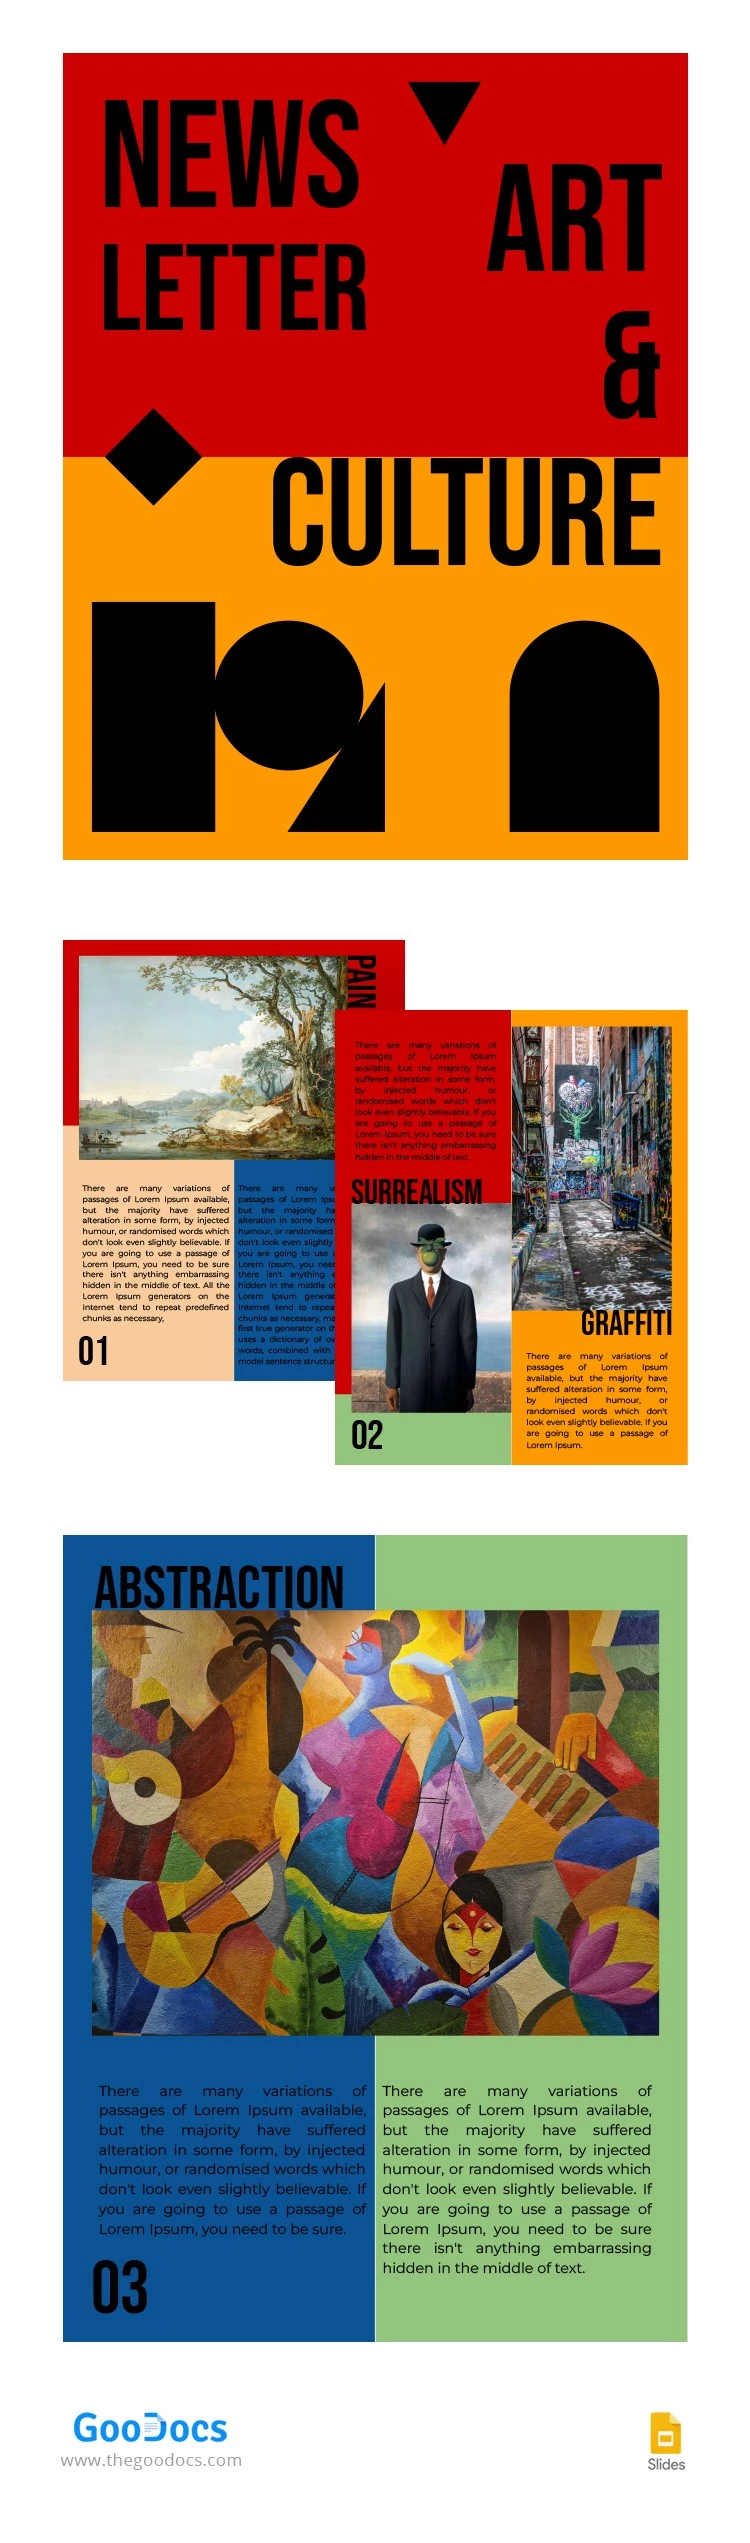 Colorful Art&Culture Newsletter - free Google Docs Template - 10063321